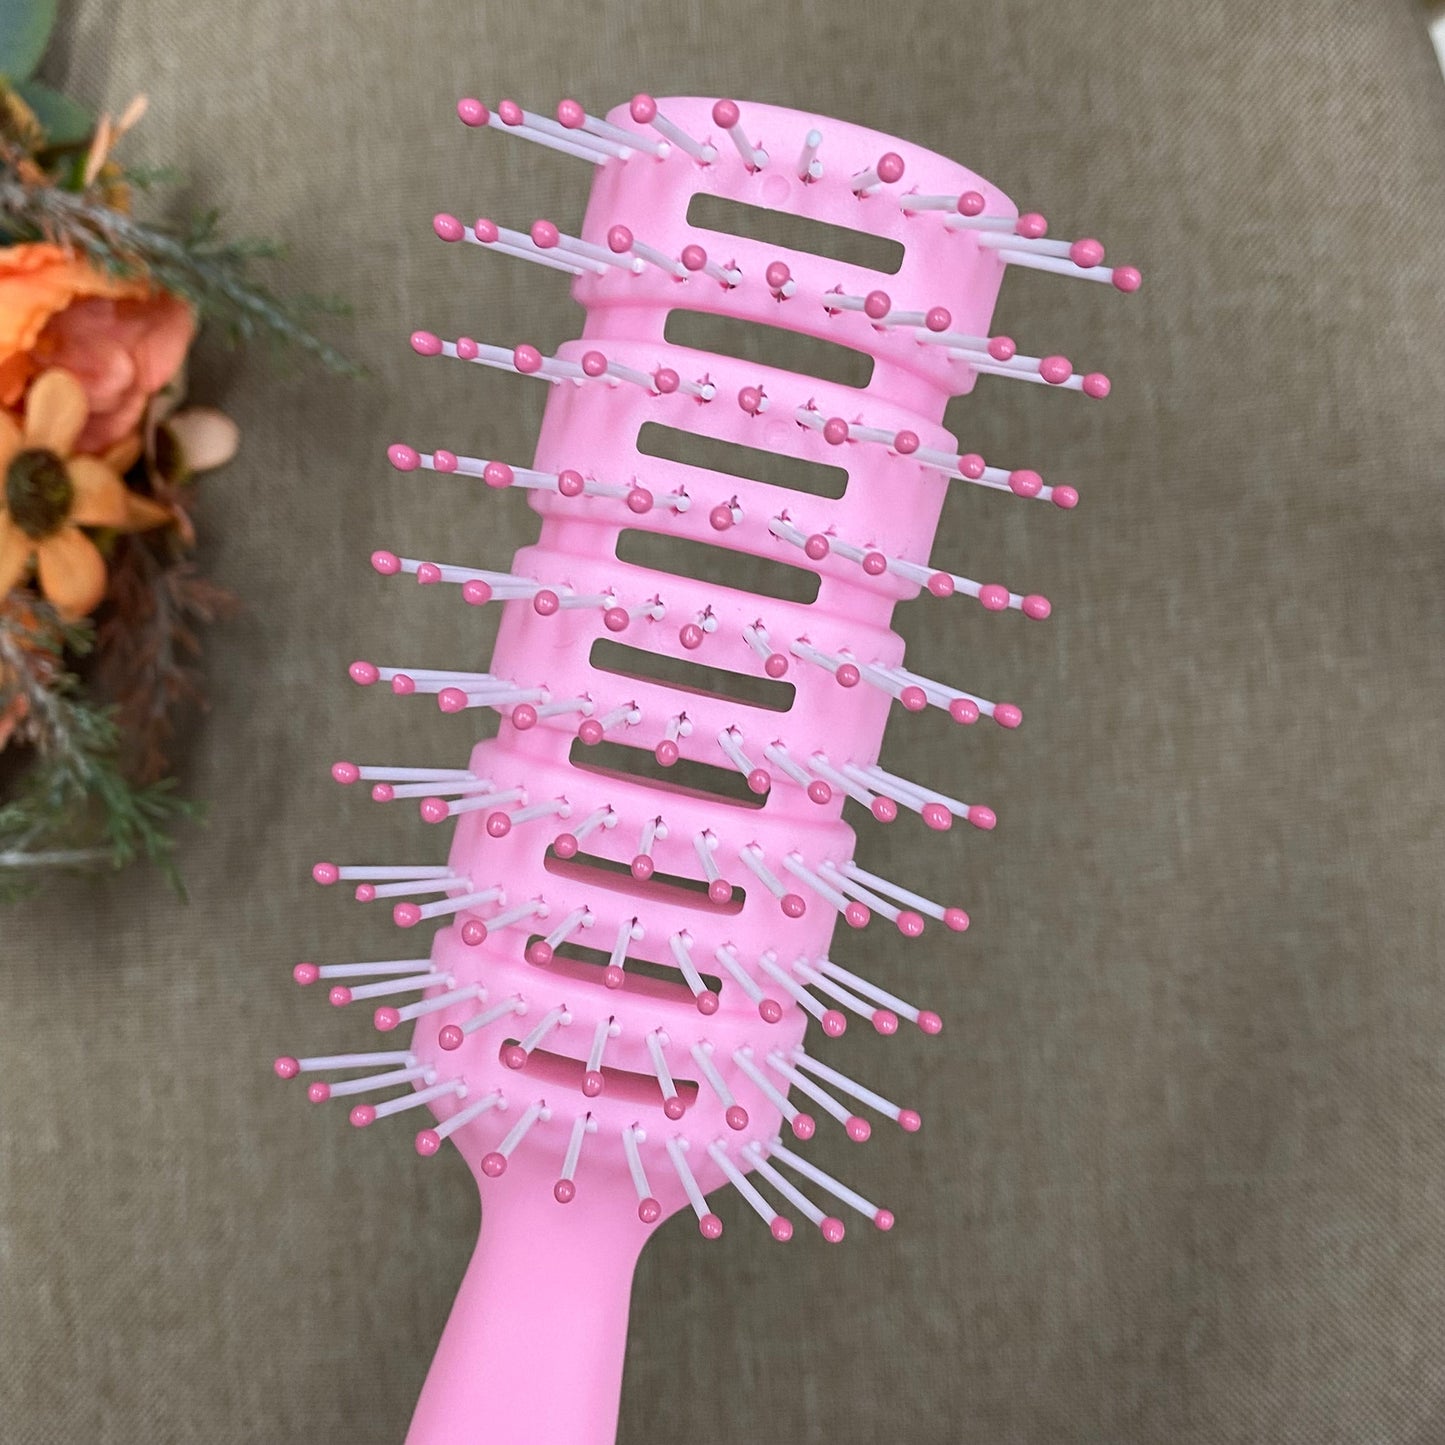 Hollow Out Hair Brush Scalp Massage Combs Hair Styling Detangler Fast Blow Drying Detangling Tool Wet Dry Curly Hair